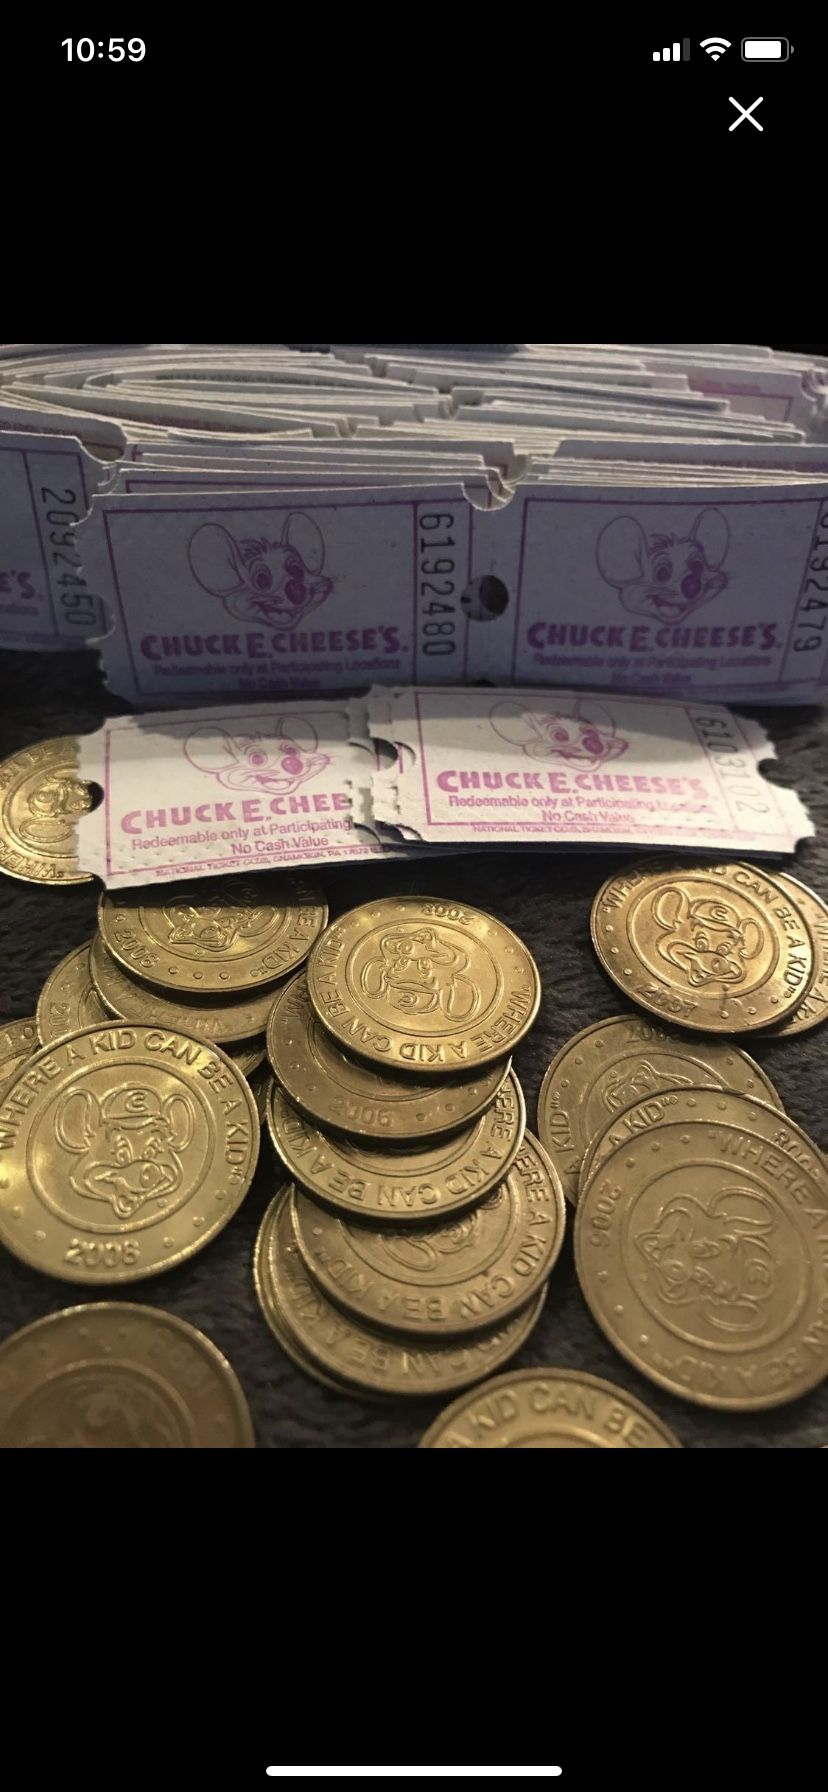 Chucky Cheese tokens and tickets